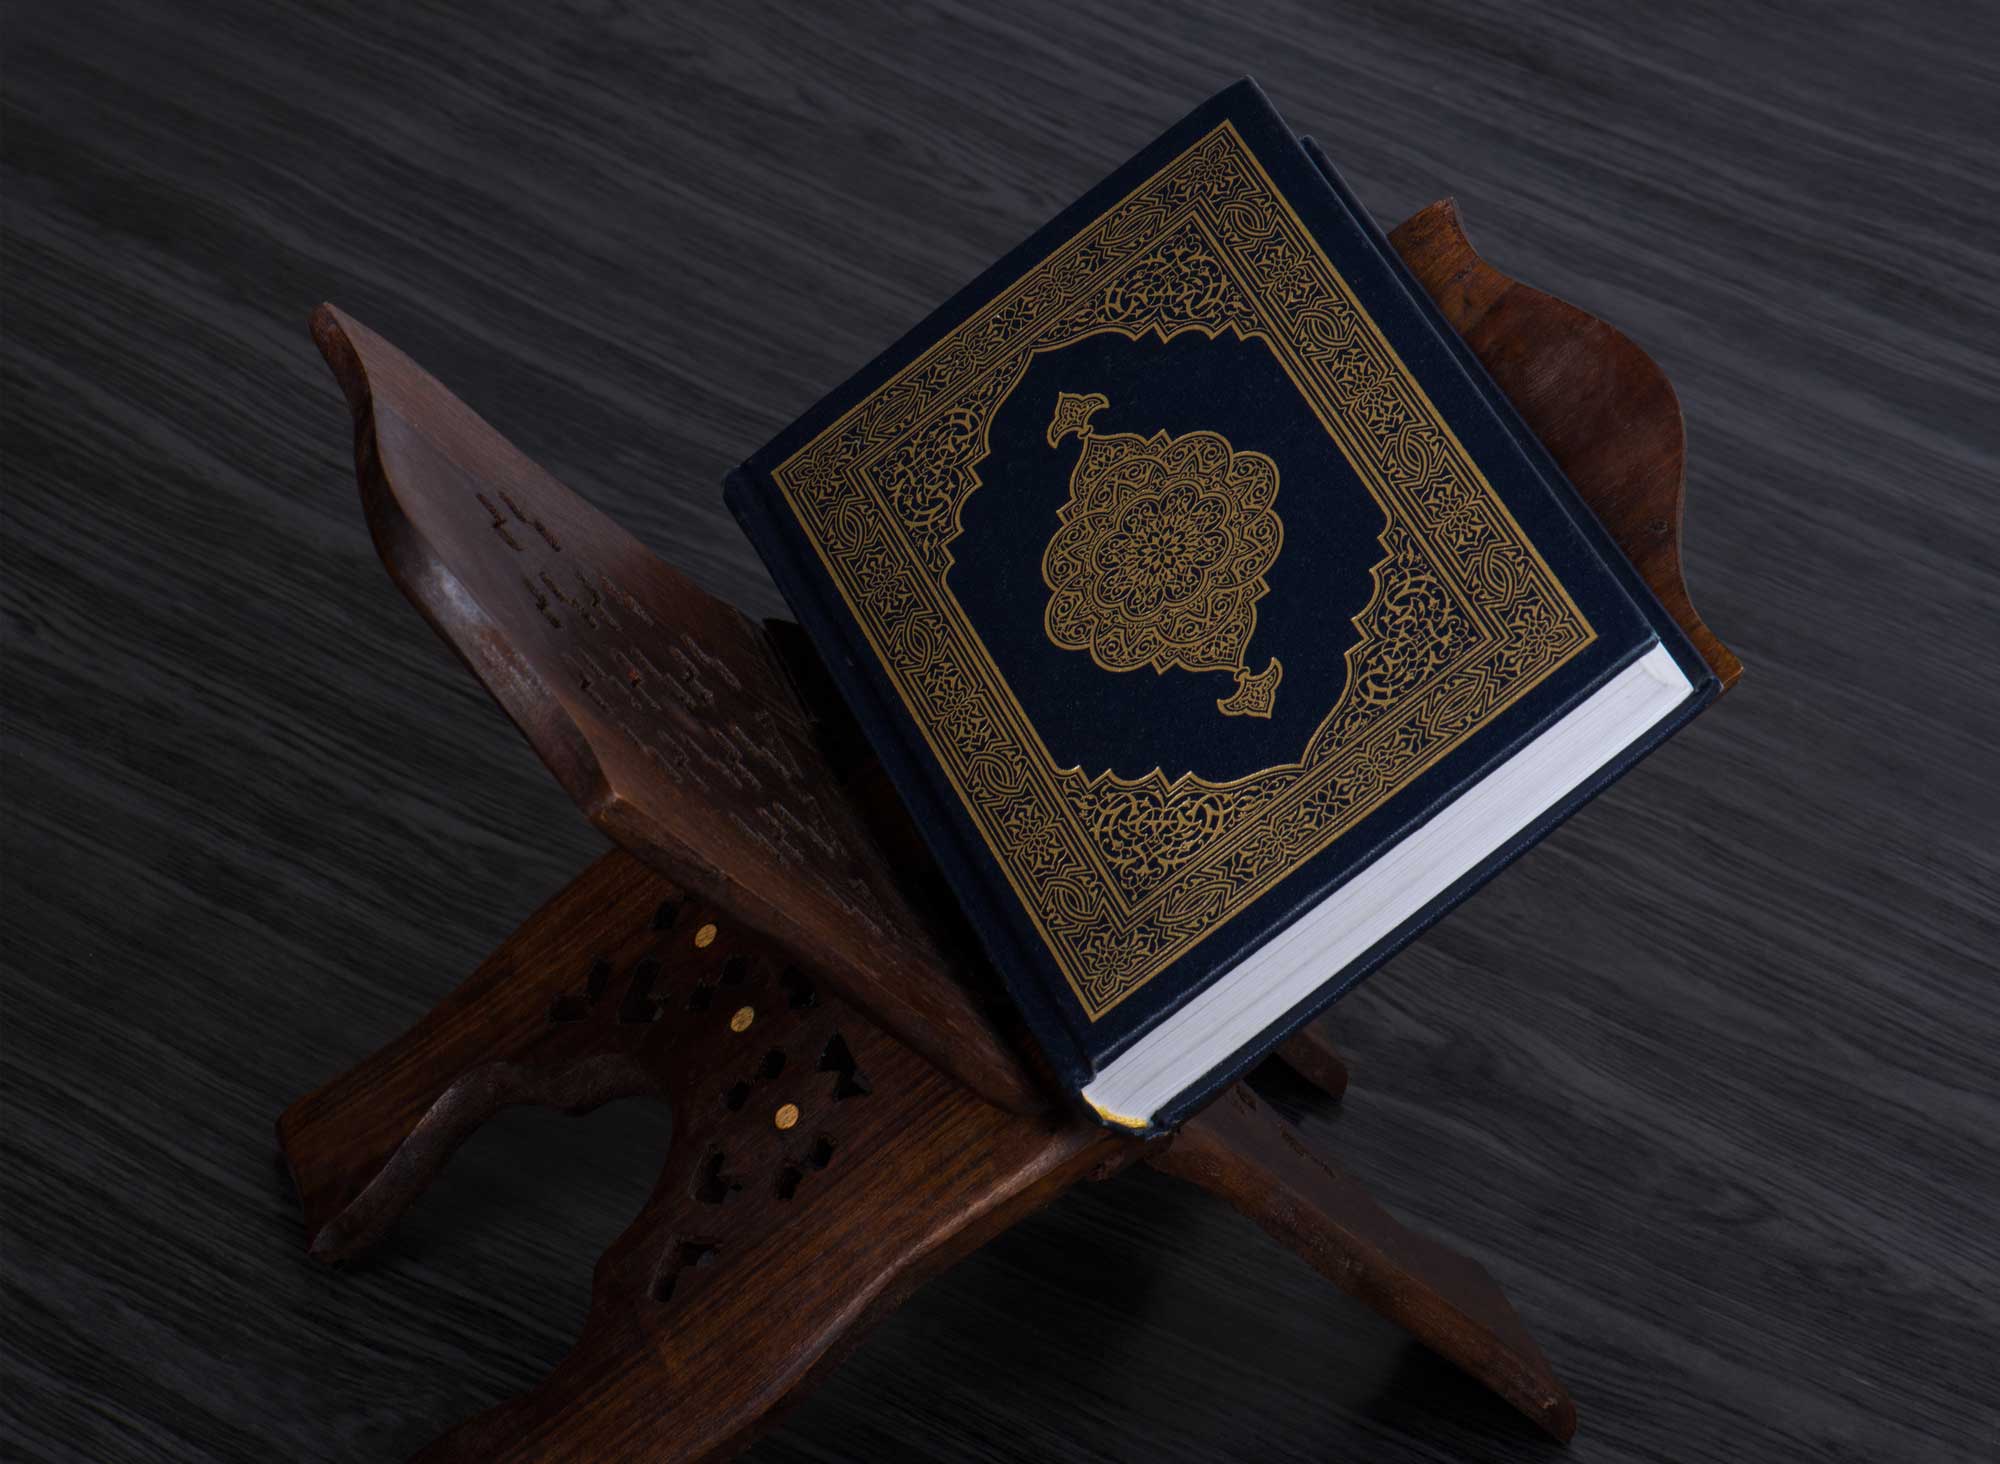 What Are the Virtues of Ayat Al-Kursi? | About Islam